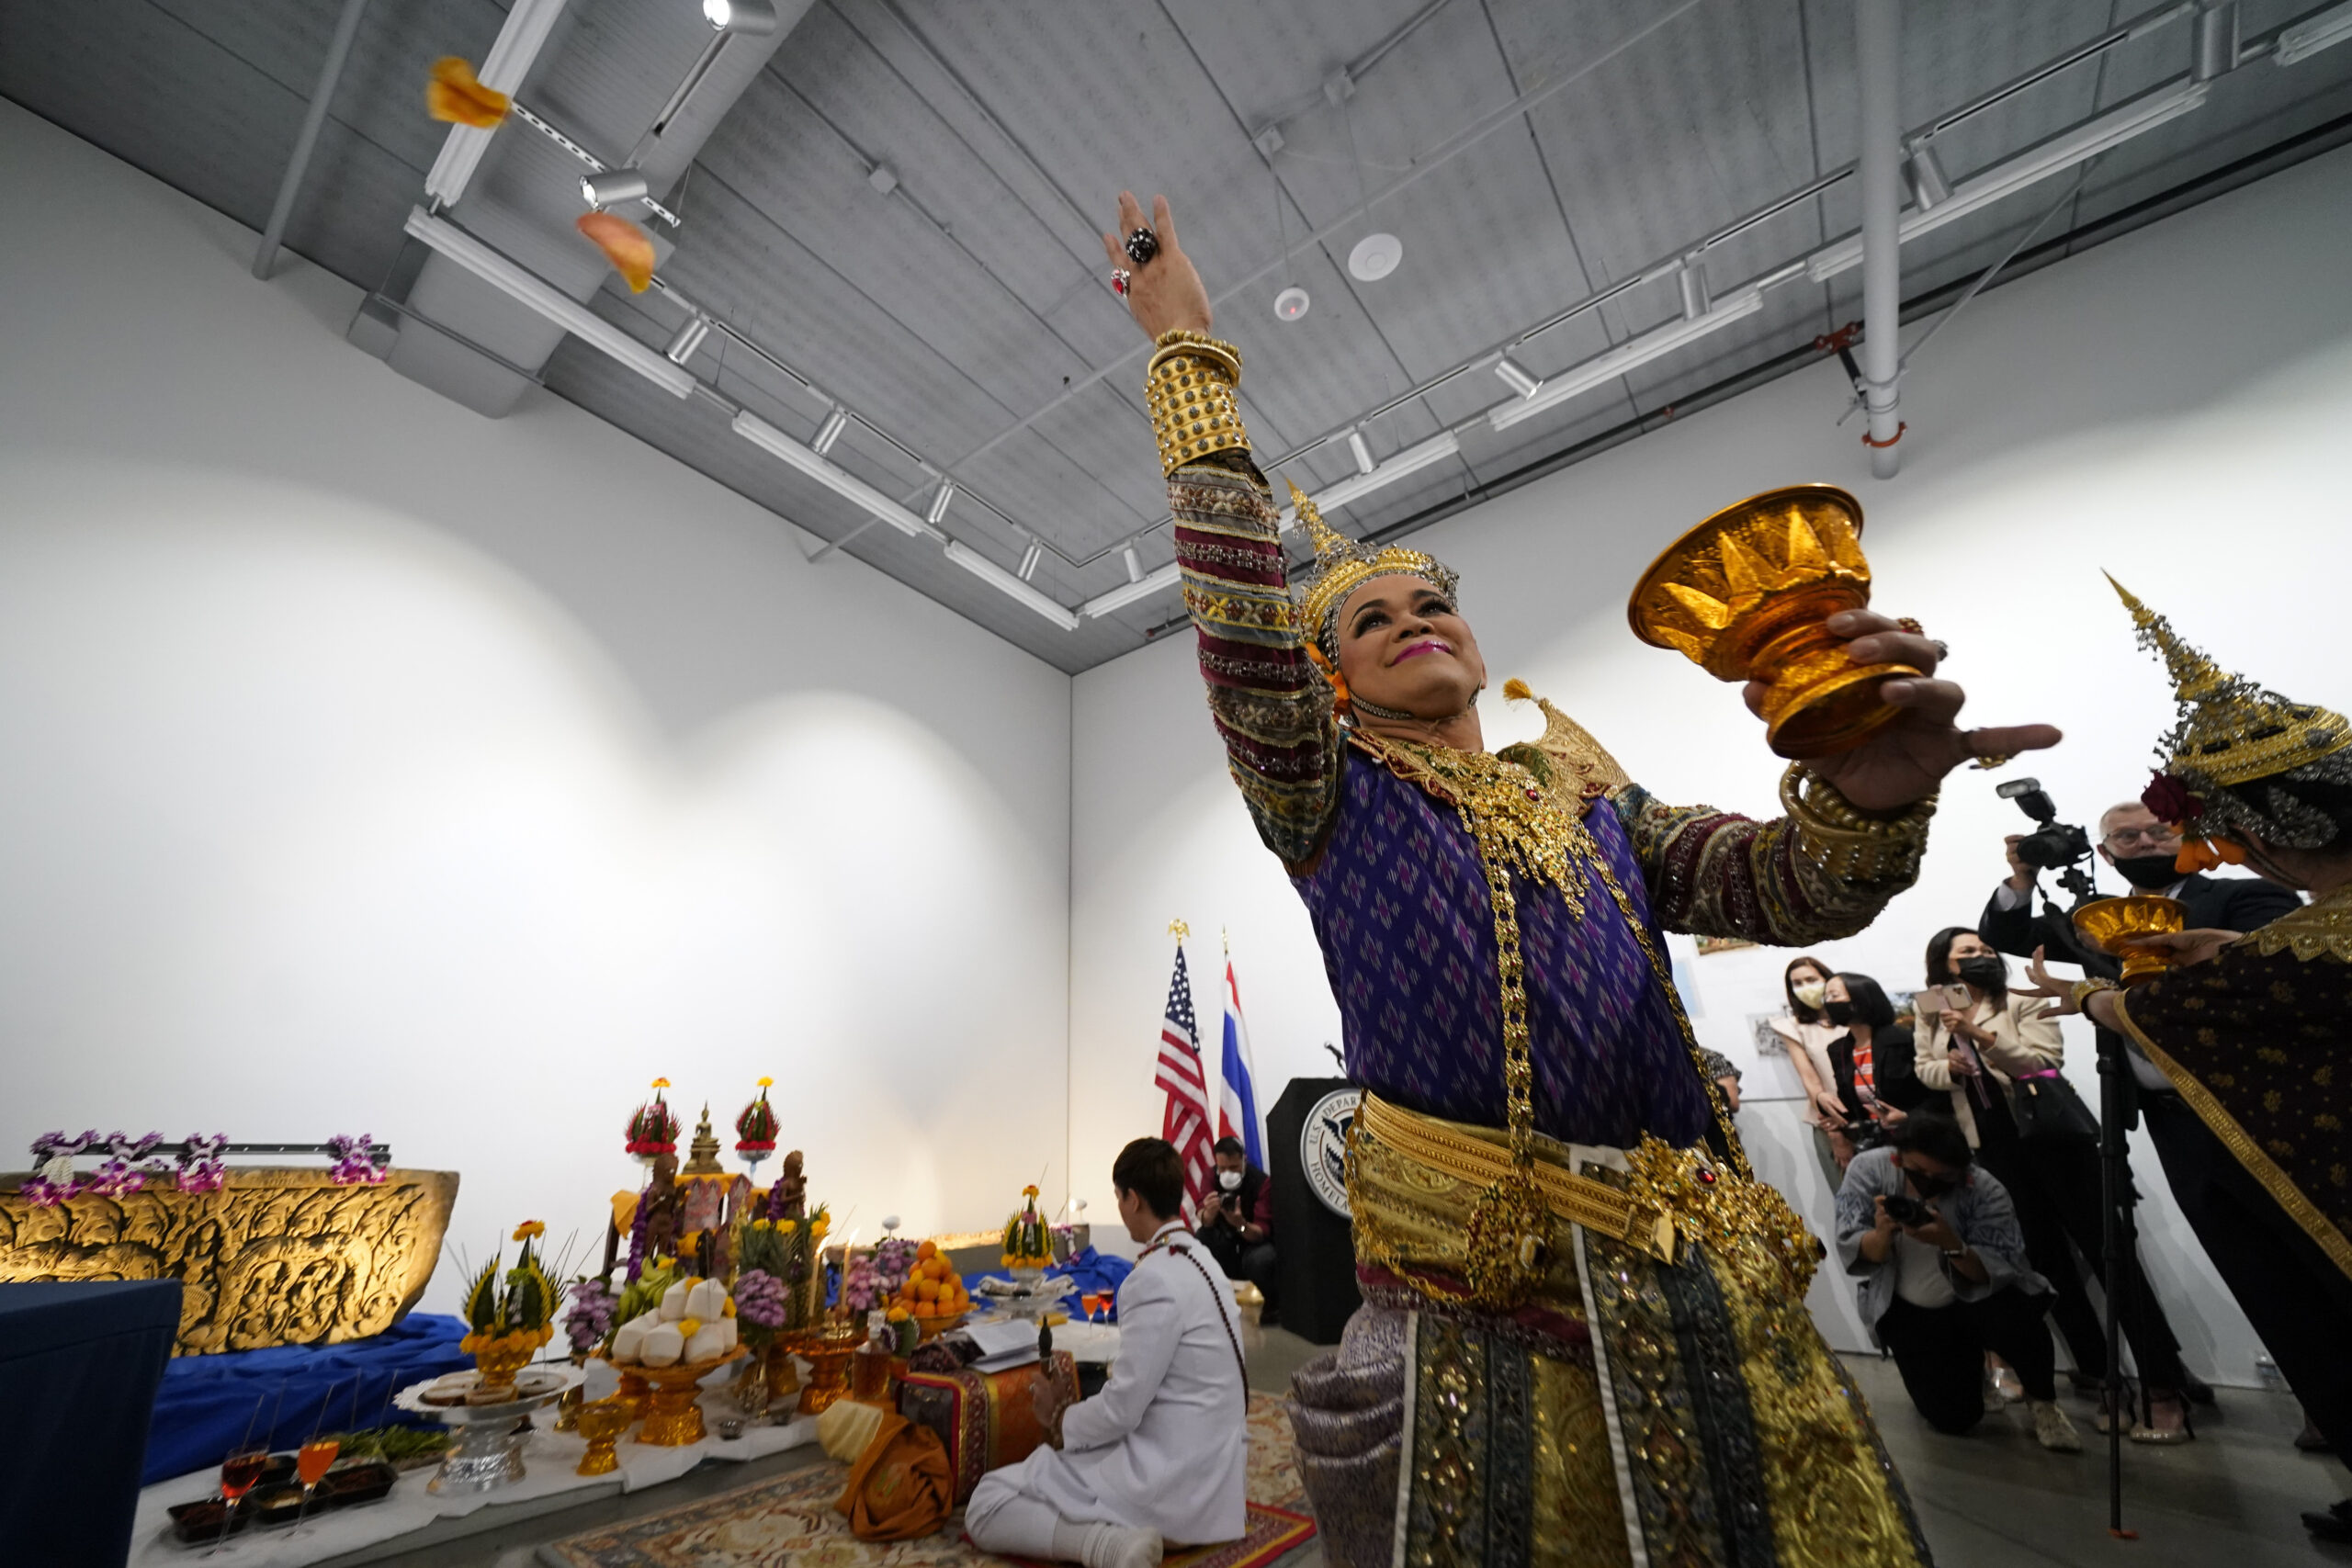 Thai dancers perform during a ceremony to return two stolen hand-carved sandstone lintels dating back to the 9th and 10th centuries to the Thai government Tuesday, May 25, 2021, in Los Angeles. The 1,500-pound (680-kilogram) antiquities had been stolen and exported from Thailand — a violation of Thai law — a half-century ago, authorities said, and donated to the city of San Francisco. They had been exhibited at the San Francisco Asian Art Museum. (AP Photo/Ashley Landis)